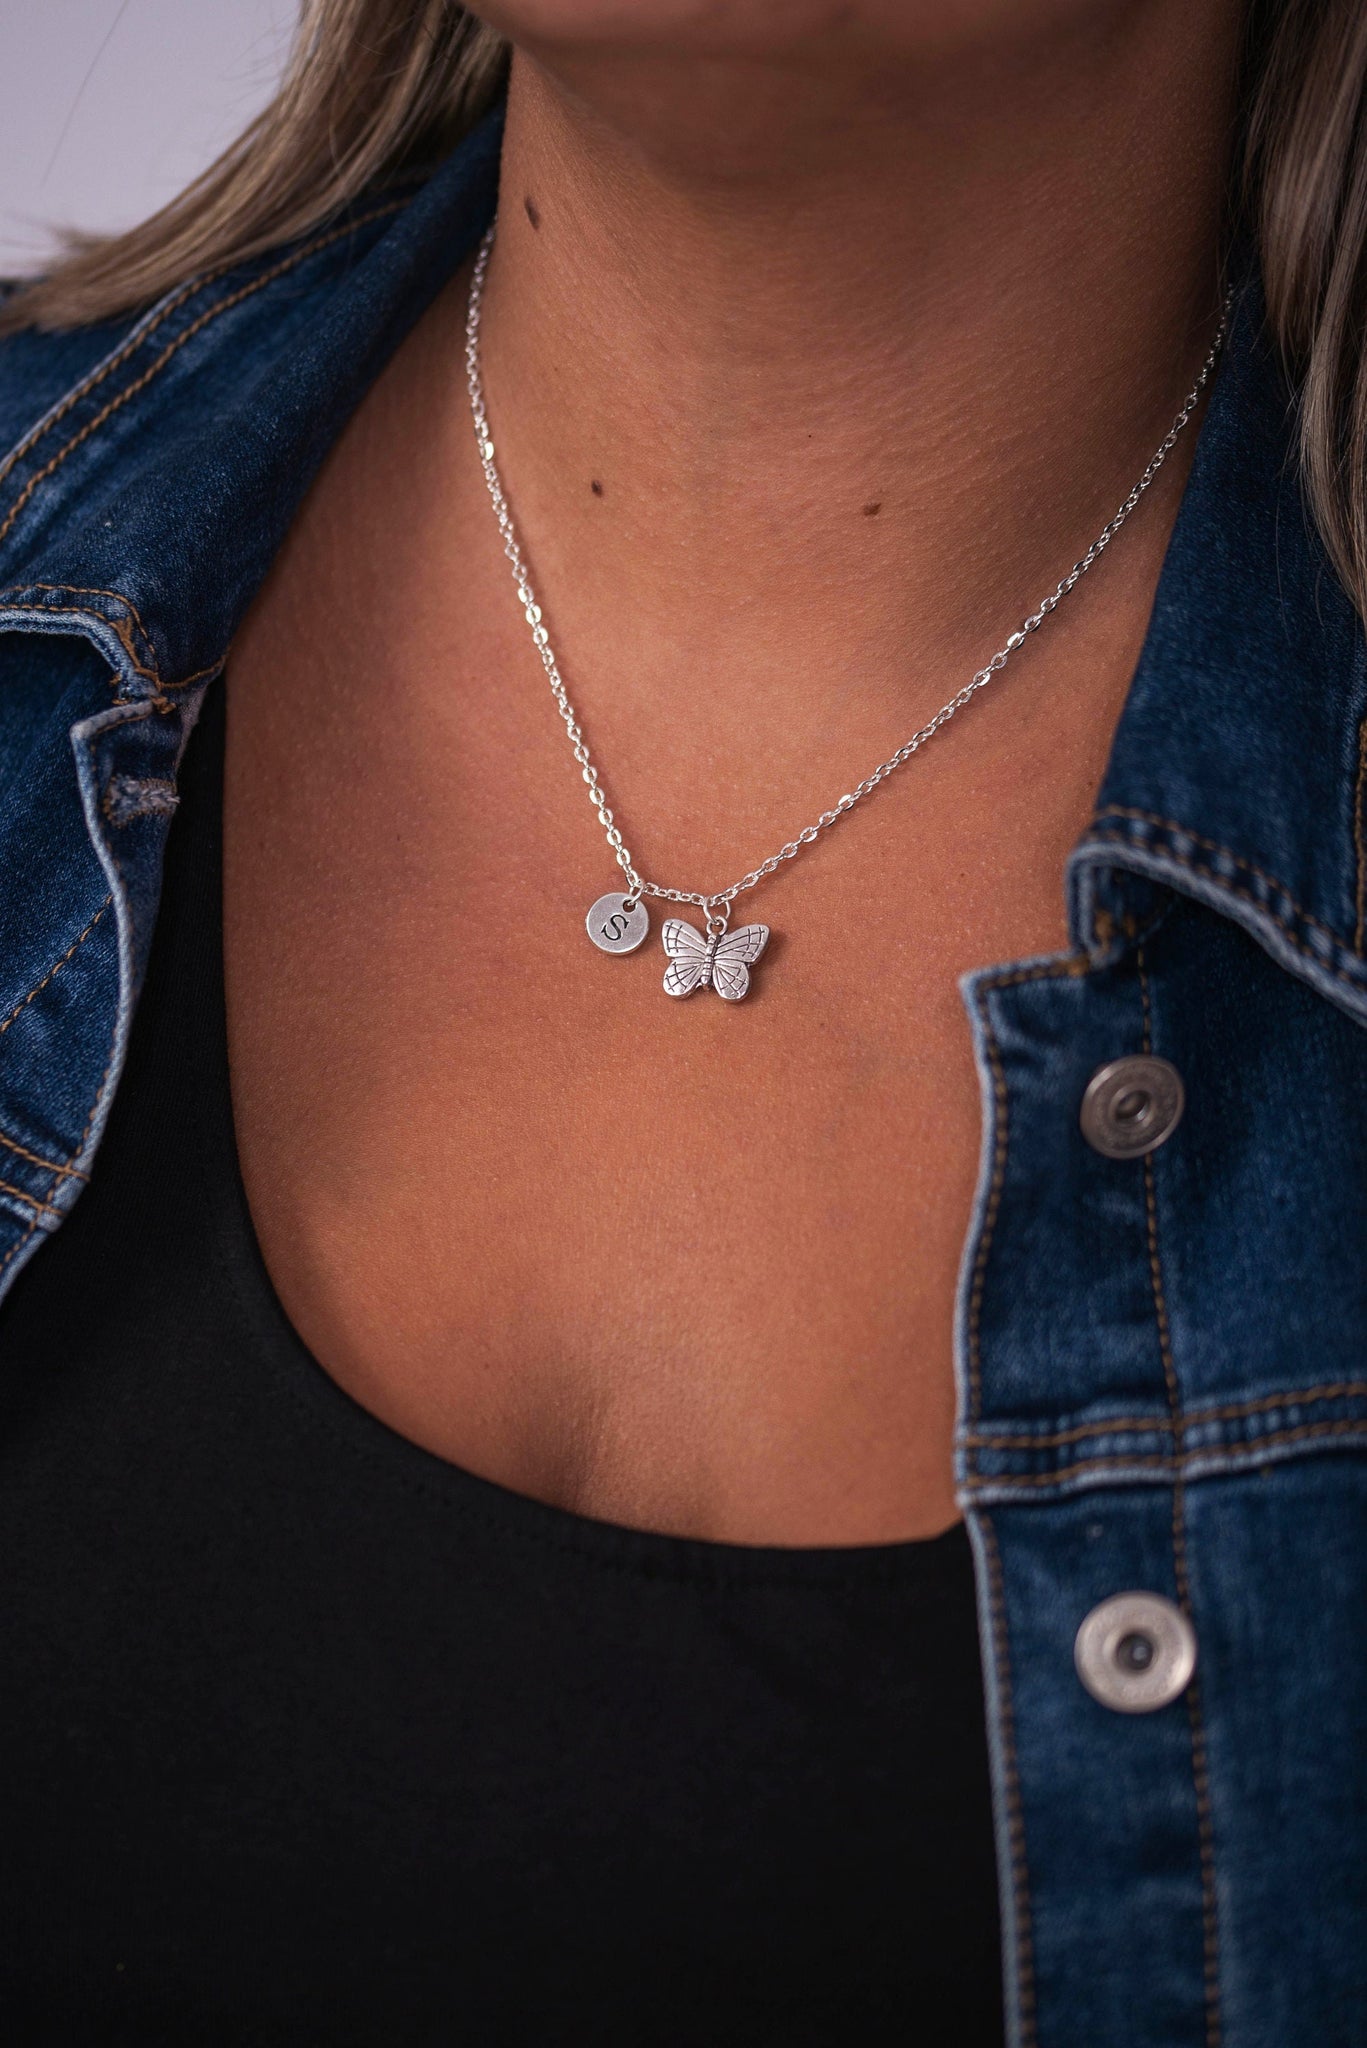 Butterfly Necklace, Butterfly Charm Necklace, Children Necklace, Personalized Butterfly, Butterfly Gift, Butterfly Jewelry, Child Gift, Kids